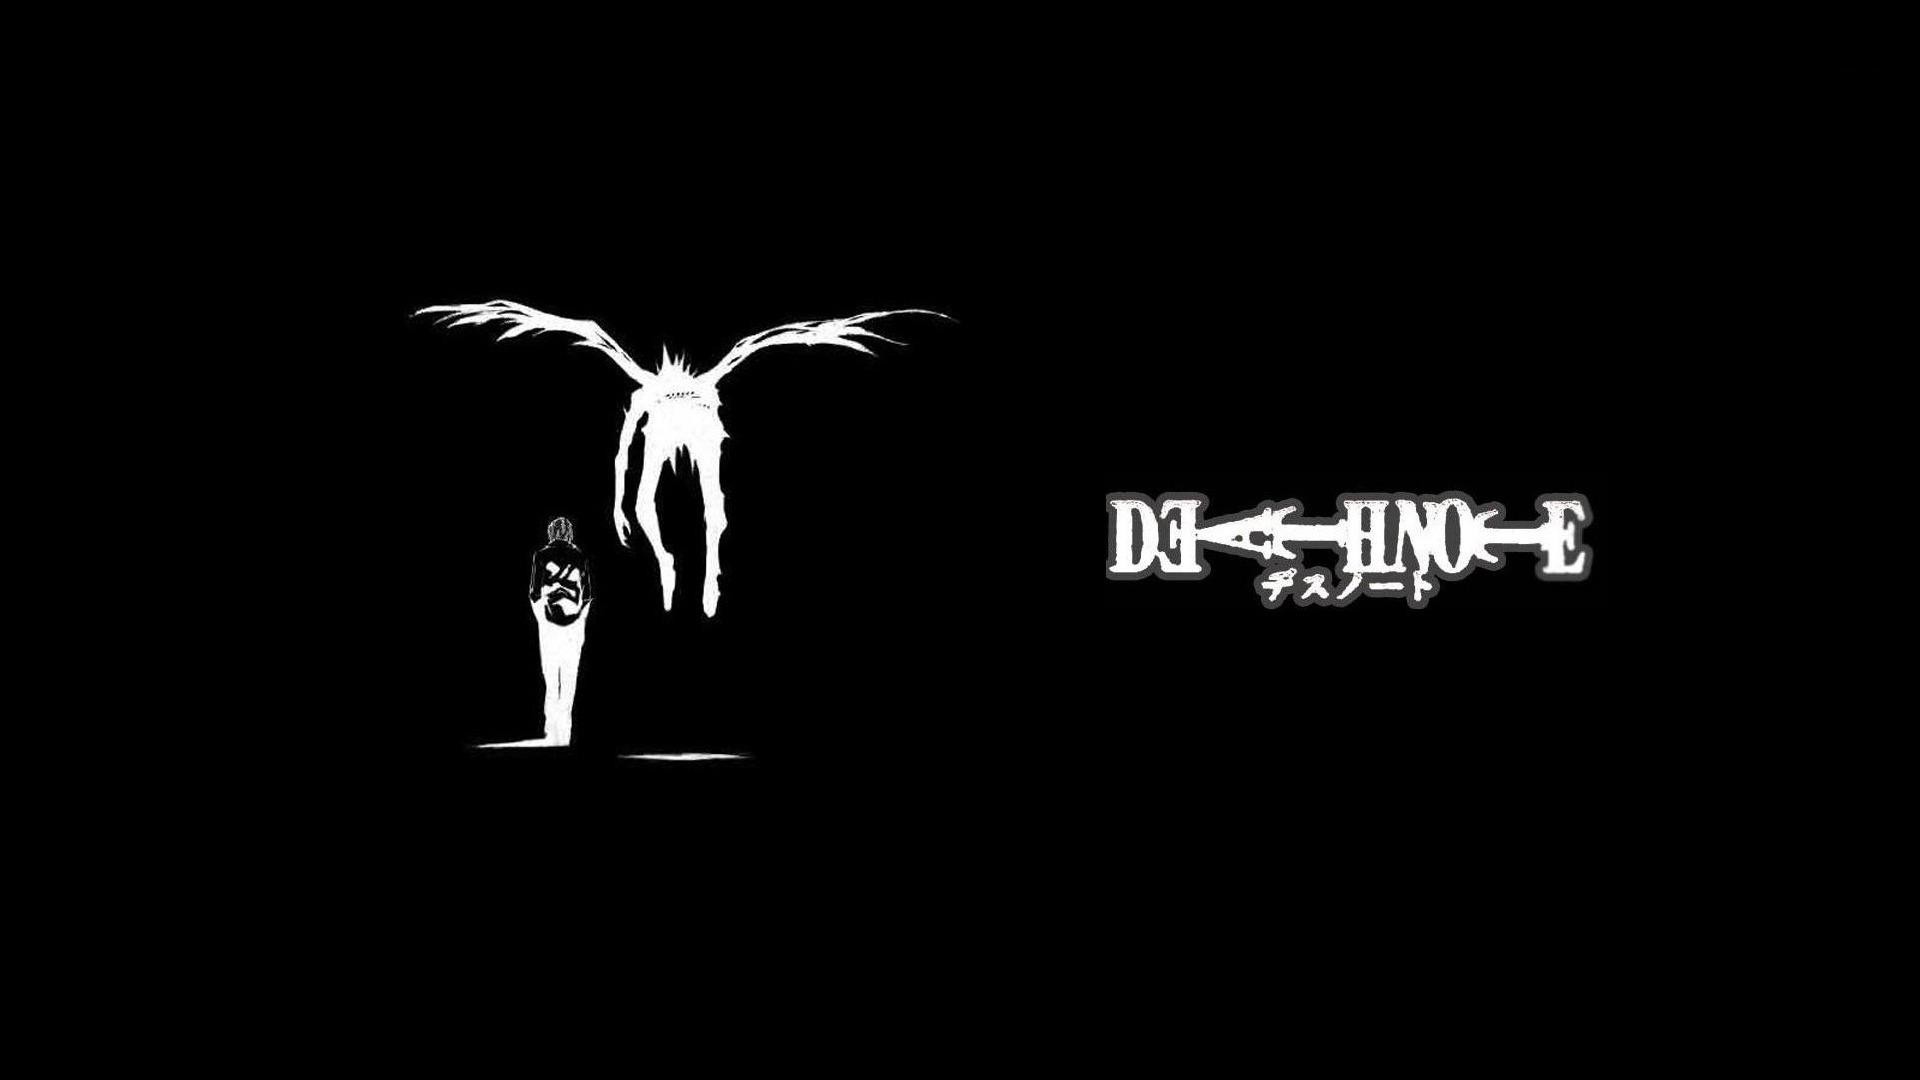 anime wallpaper laptop death note Death note wallpapers cave